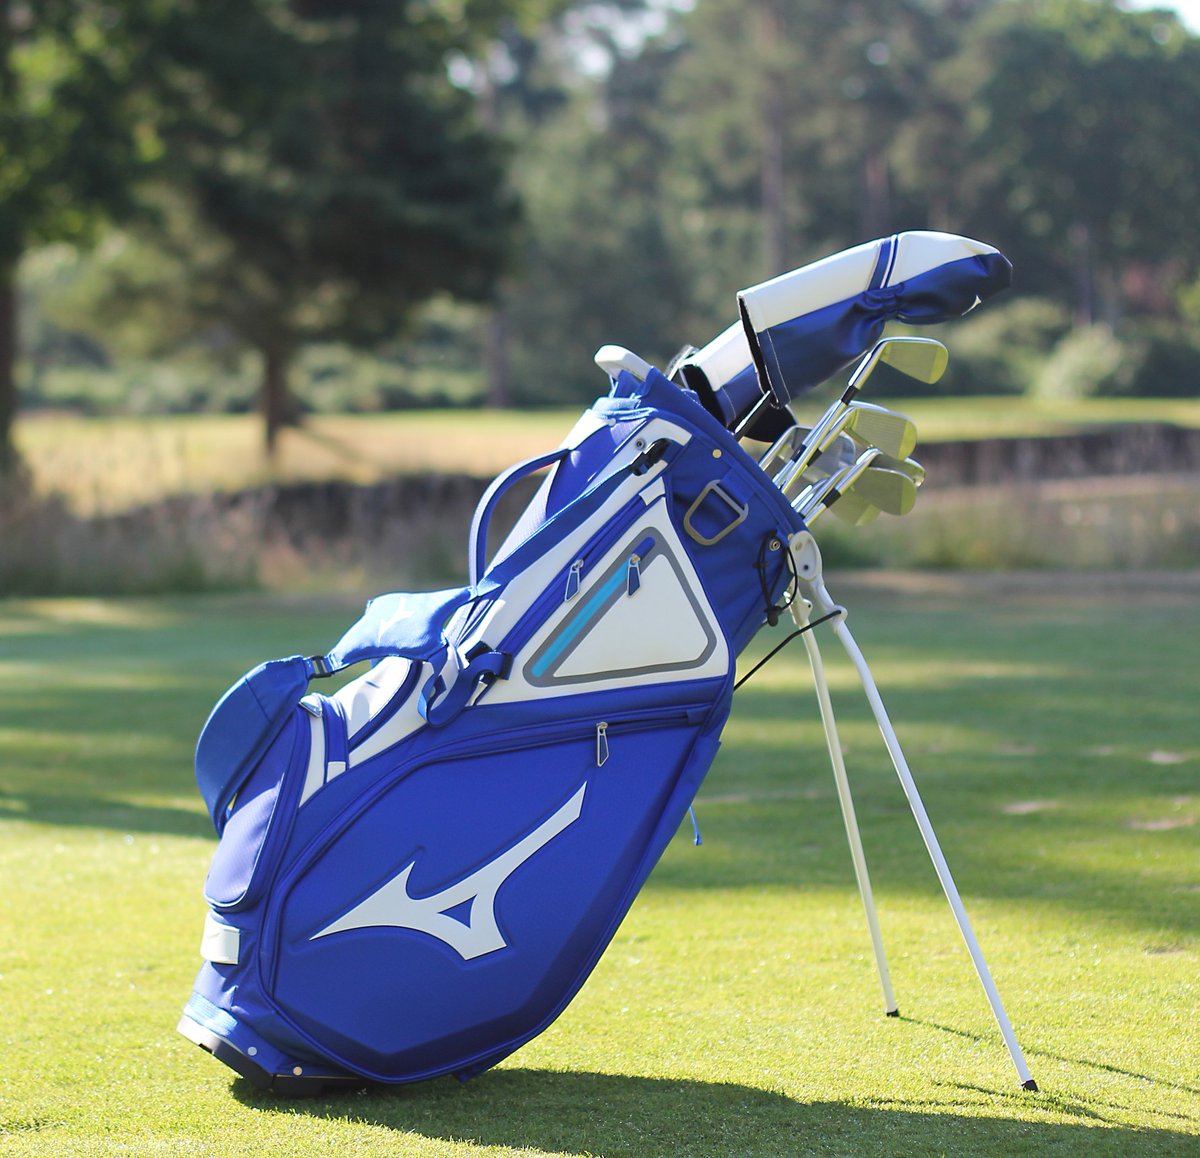 Mizuno Golf Europe on Twitter: "Whether you're walking or riding, the Pro has with it engineered to flip between cart and carrying. View the bag here https://t.co/UQssJ48zBx #nothingfeelslikeamizuno